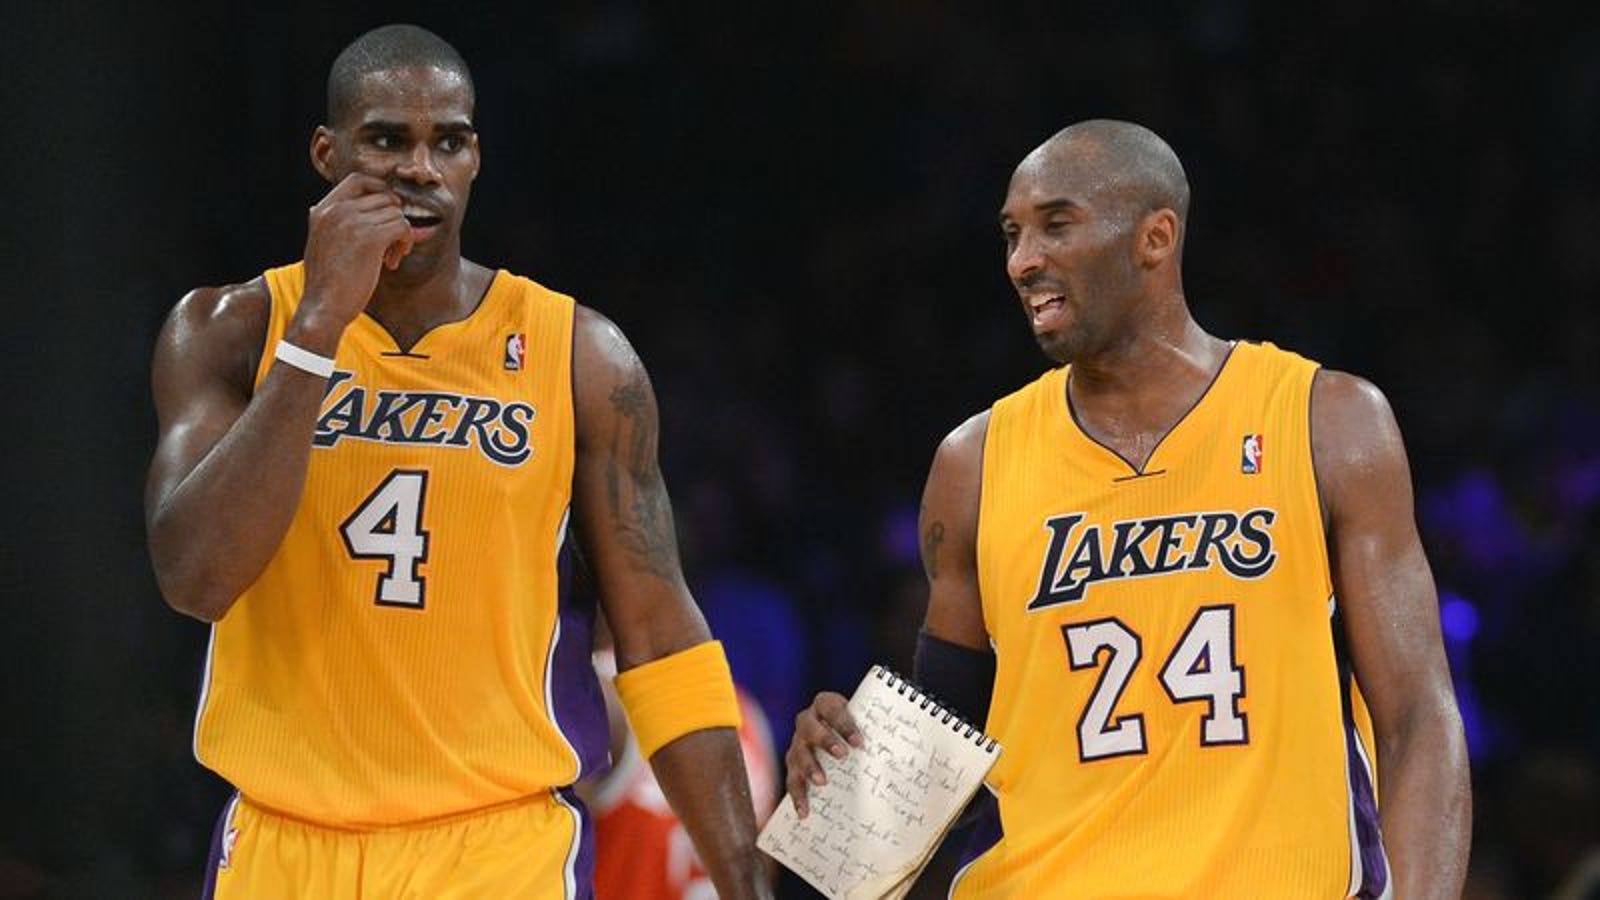 Kobe Bryant Compiles Helpful List Of 435 Aspects Of Game Antawn Jamison Needs To Improve1600 x 900